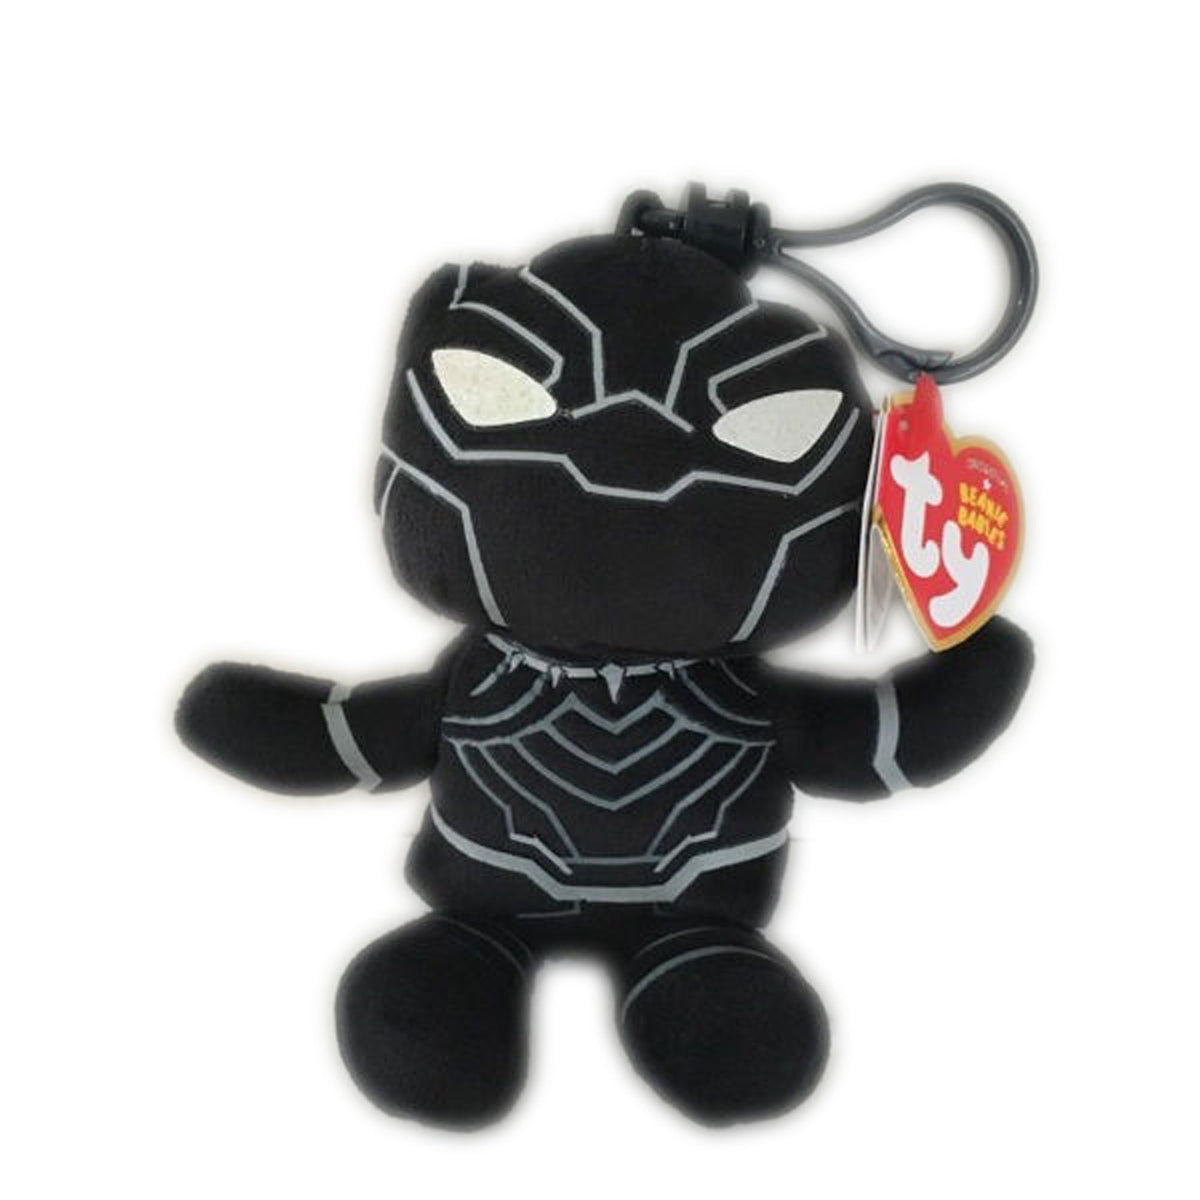 TY INC Plushes Marvel TY Beanie Boos Plush with Clip, Black Panther, 5 Inches, 1 Count 008421340033